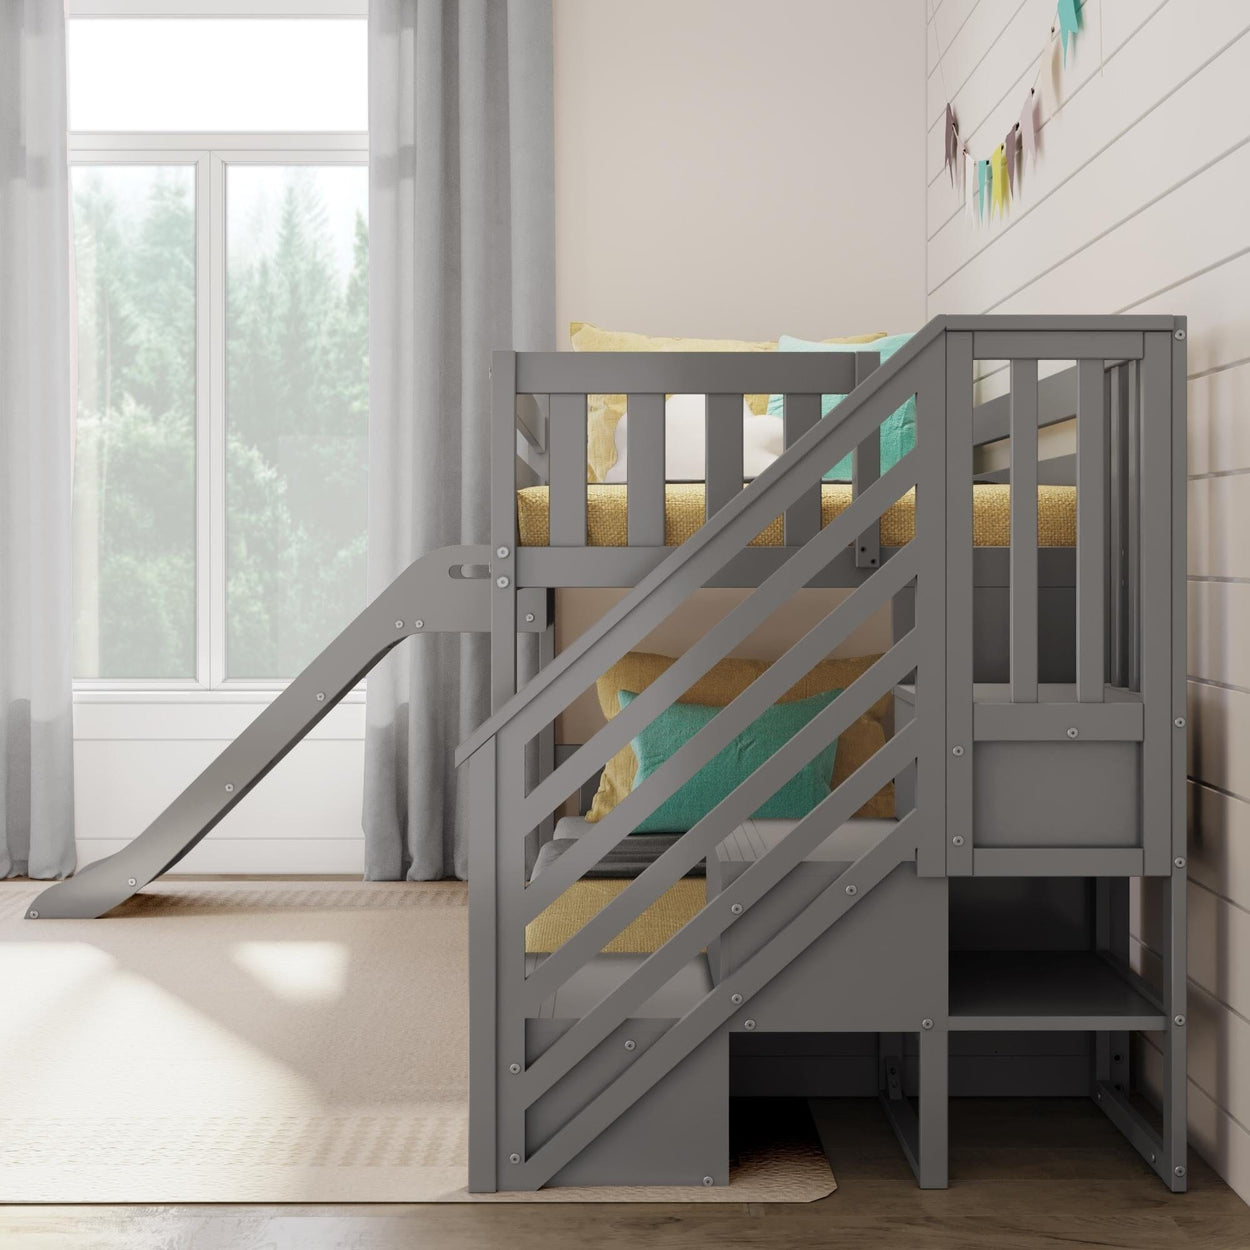 185421-121 : Bunk Beds Classic Low Bunk with Stairs and Easy Slide, Grey